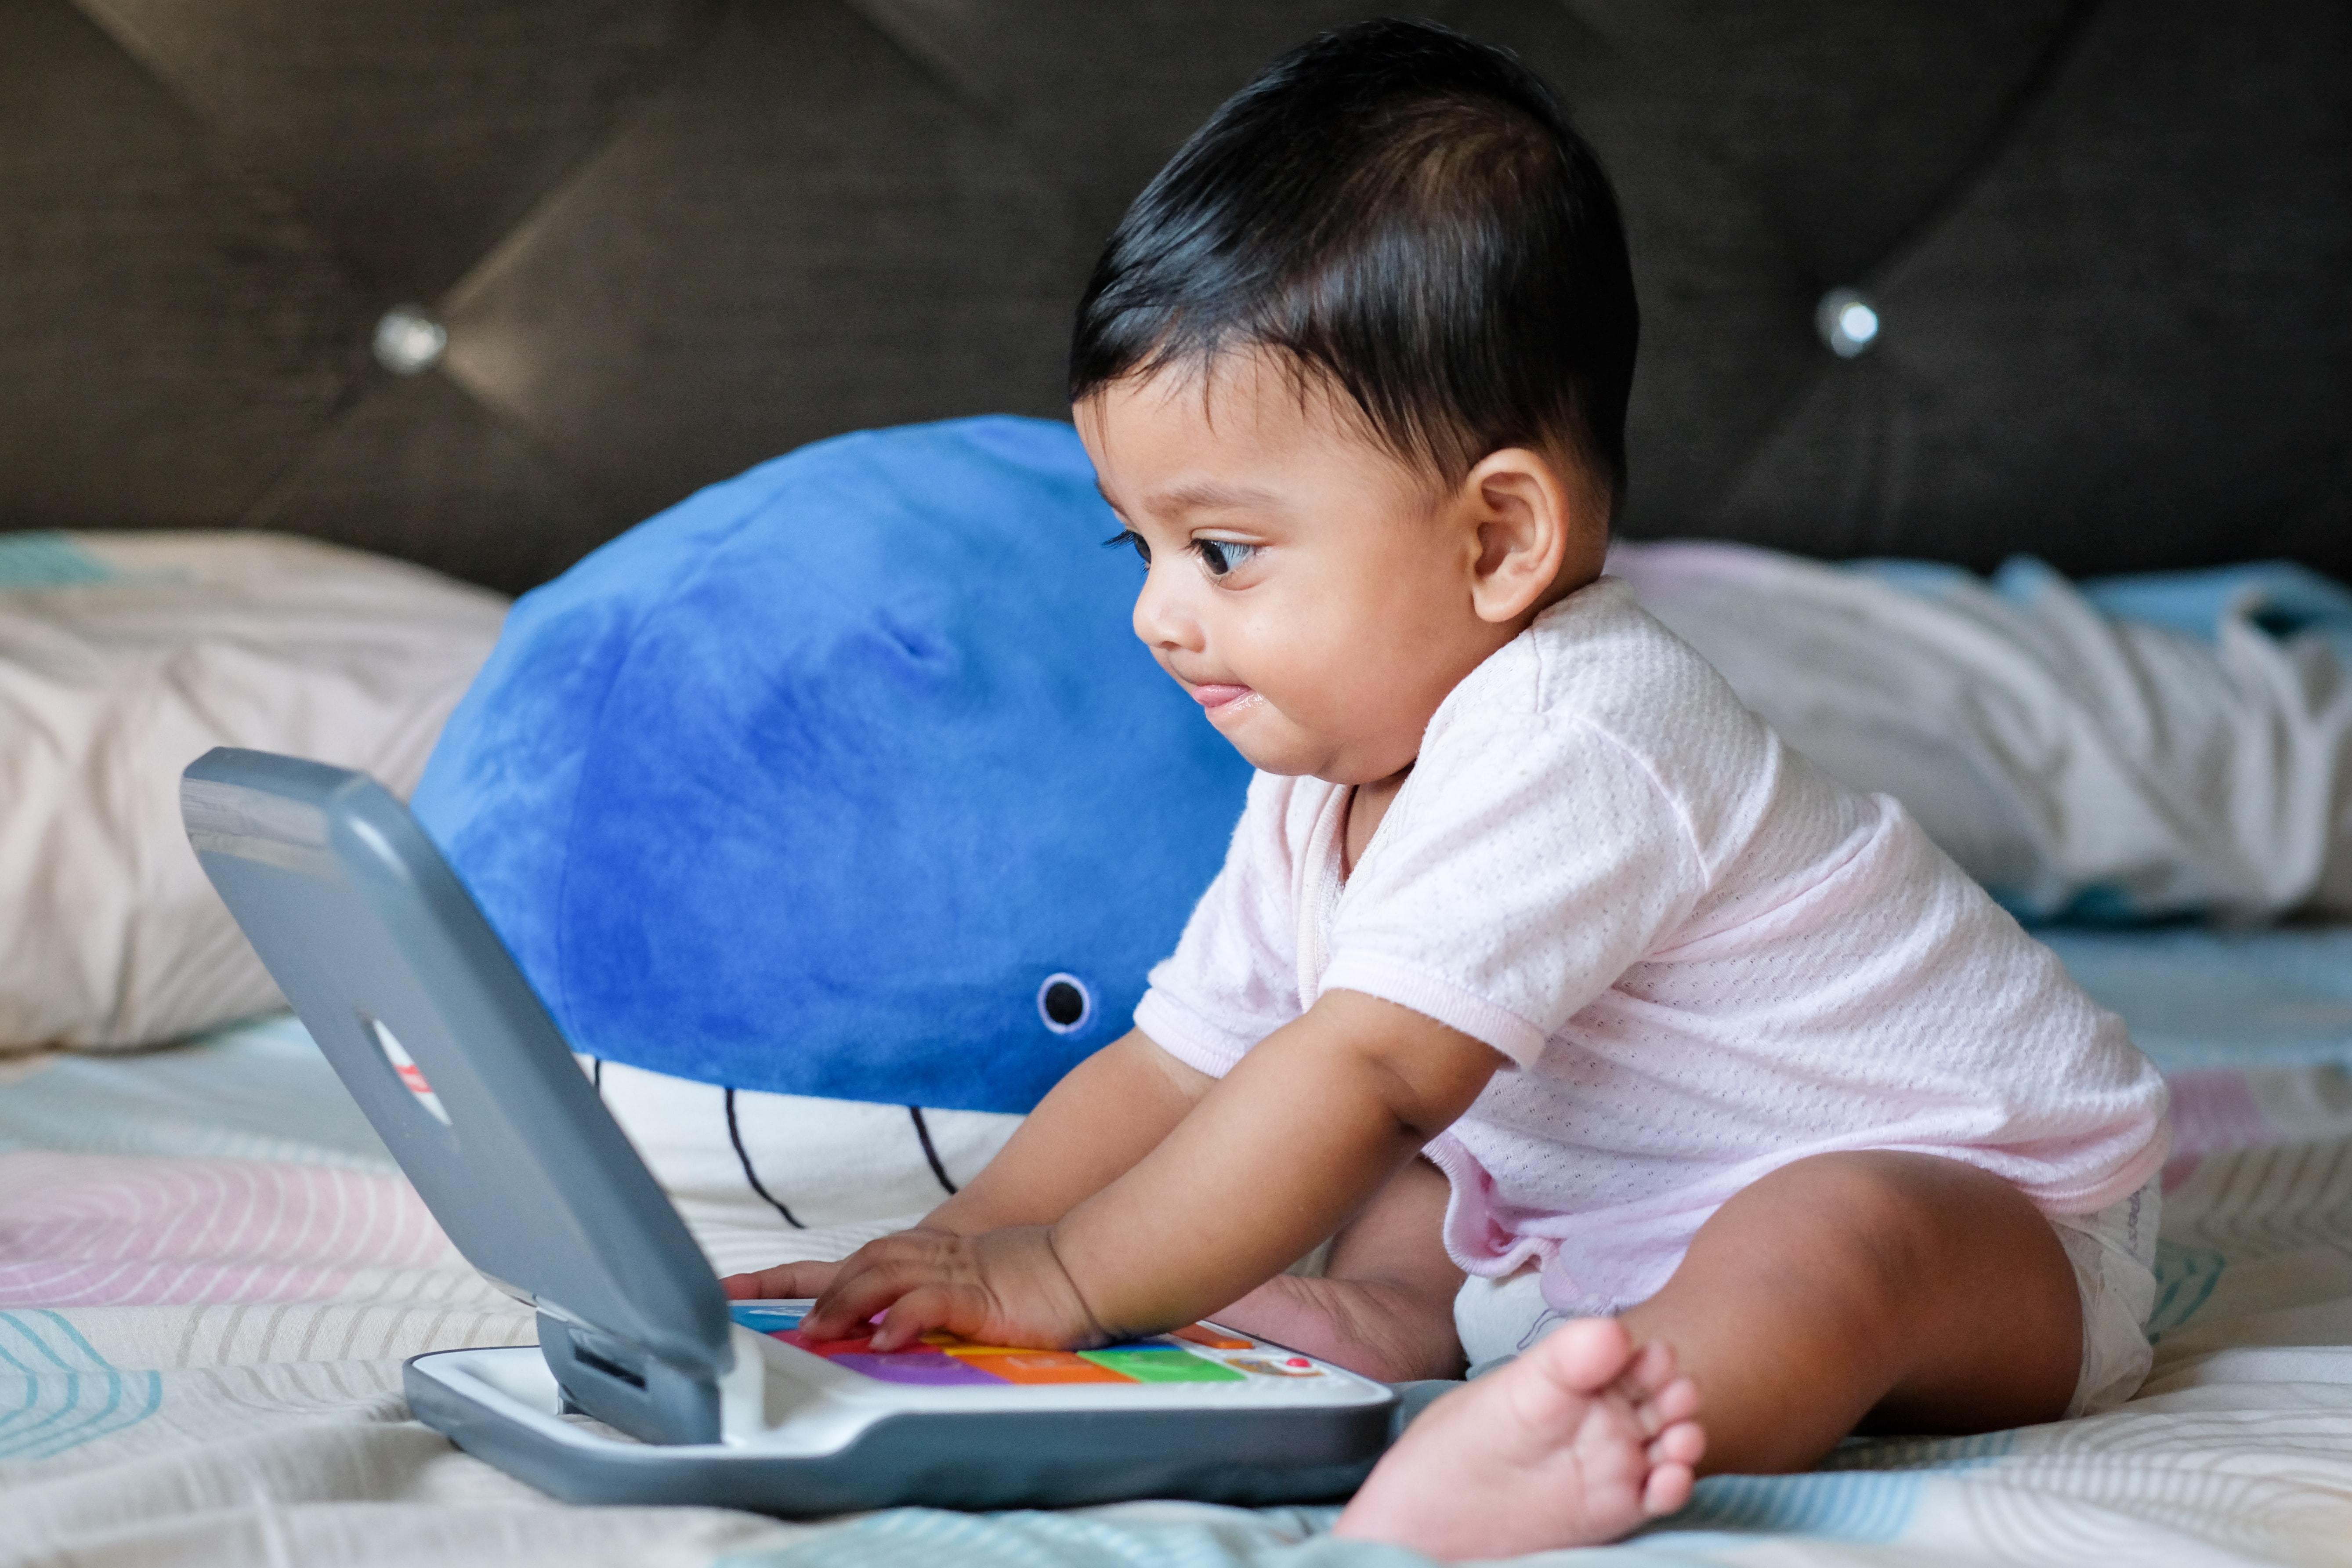 A smiling baby sits in front of a toy computer.